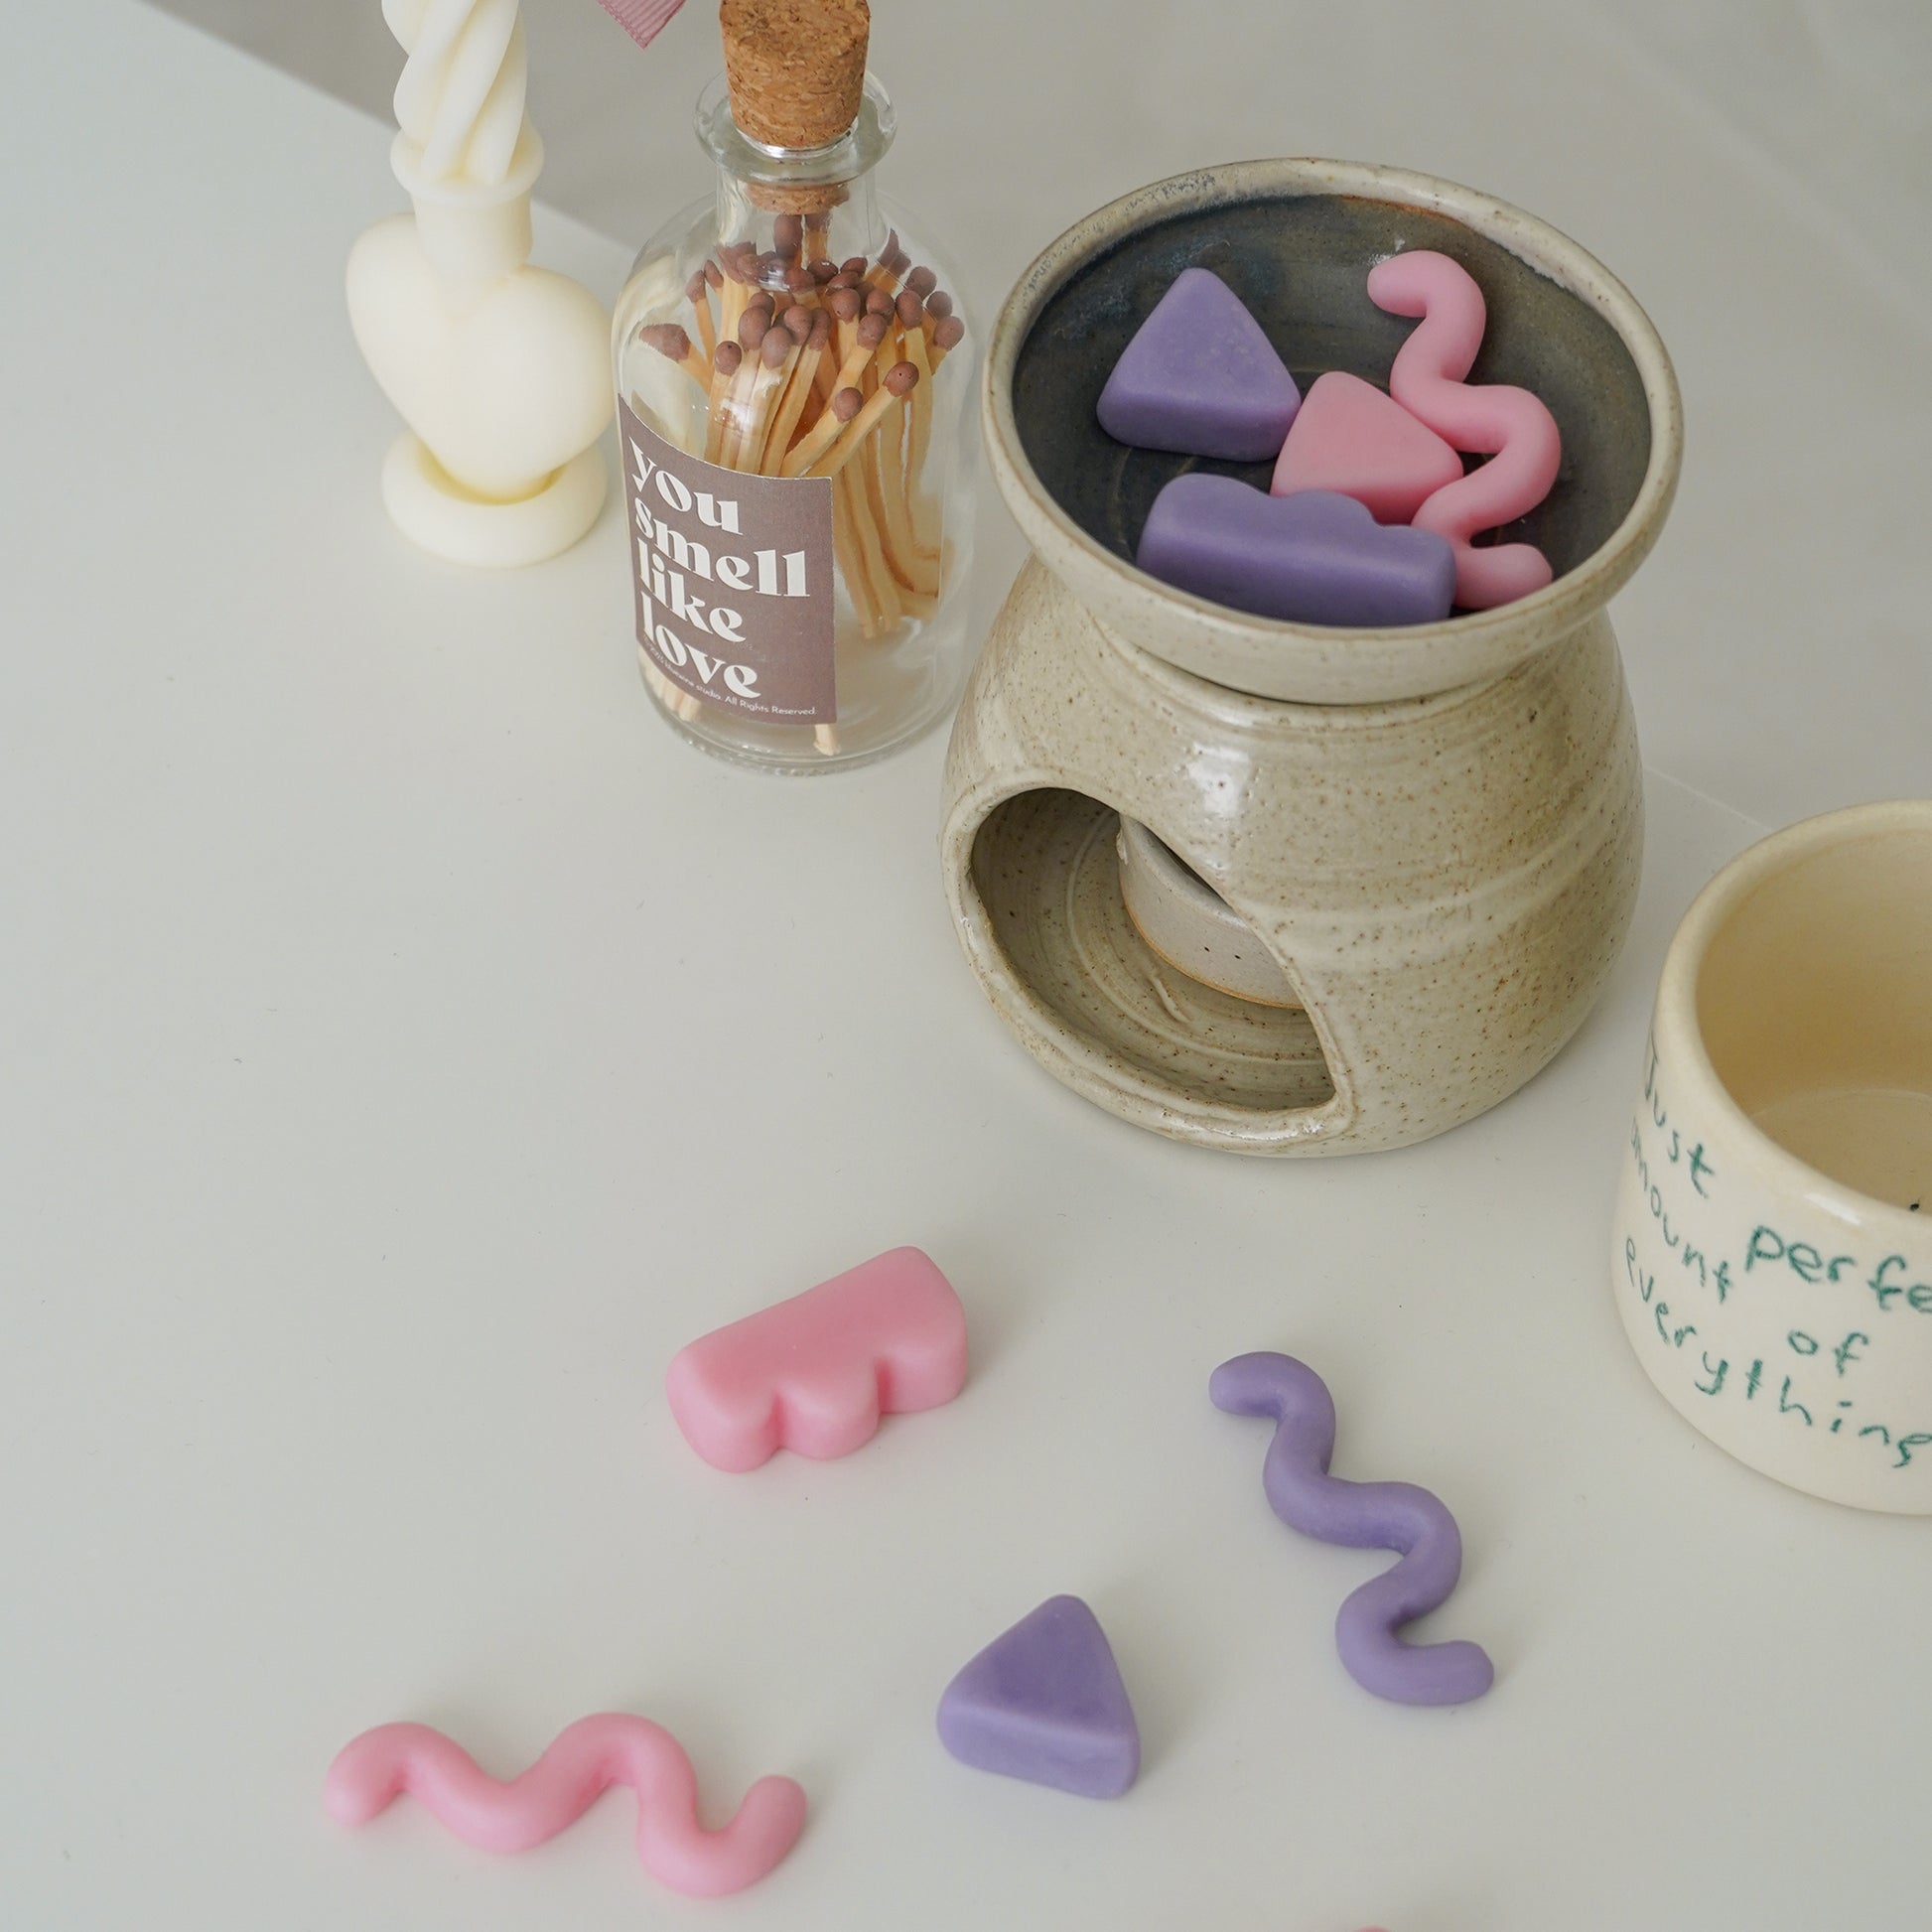 pastel geometric shape unique wax melts in a wax warmer, a match bottle, a heart twist candle, and a mug on white table